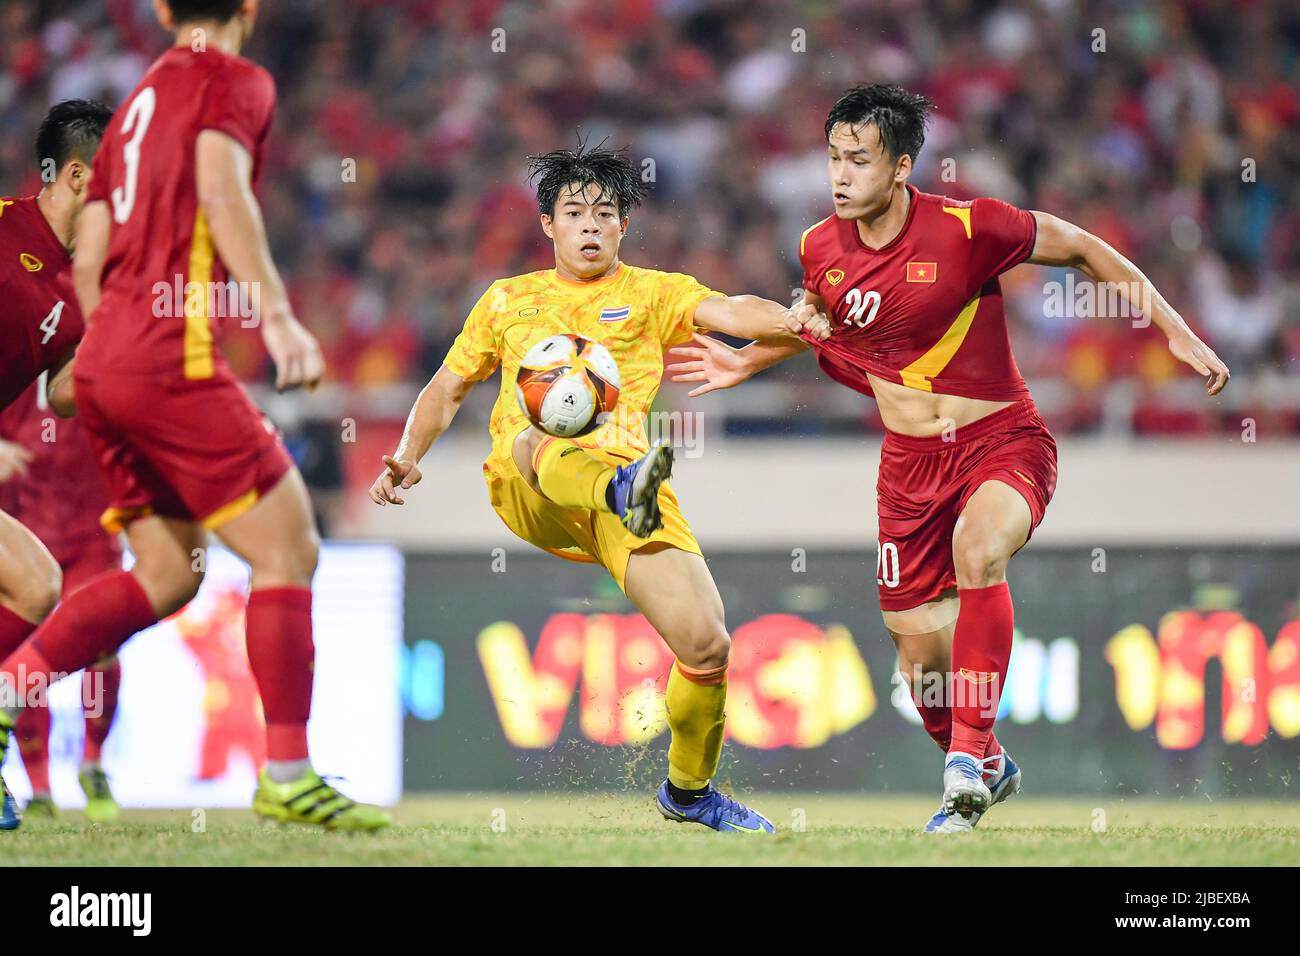 Hanoi, Vietnam. 22nd May, 2022. Ekanit Panya (L) of Thailand and Anh Bui Hoang Viet (R) of Vietnam in action during the Sea Games 2022 match between Thailand and Vietnam at My Dinh National Stadium. Final score; Thailand 0:1 Vietnam. (Photo by Amphol Thongmueangluang/SOPA Images/Sipa USA) Credit: Sipa USA/Alamy Live News Stock Photo